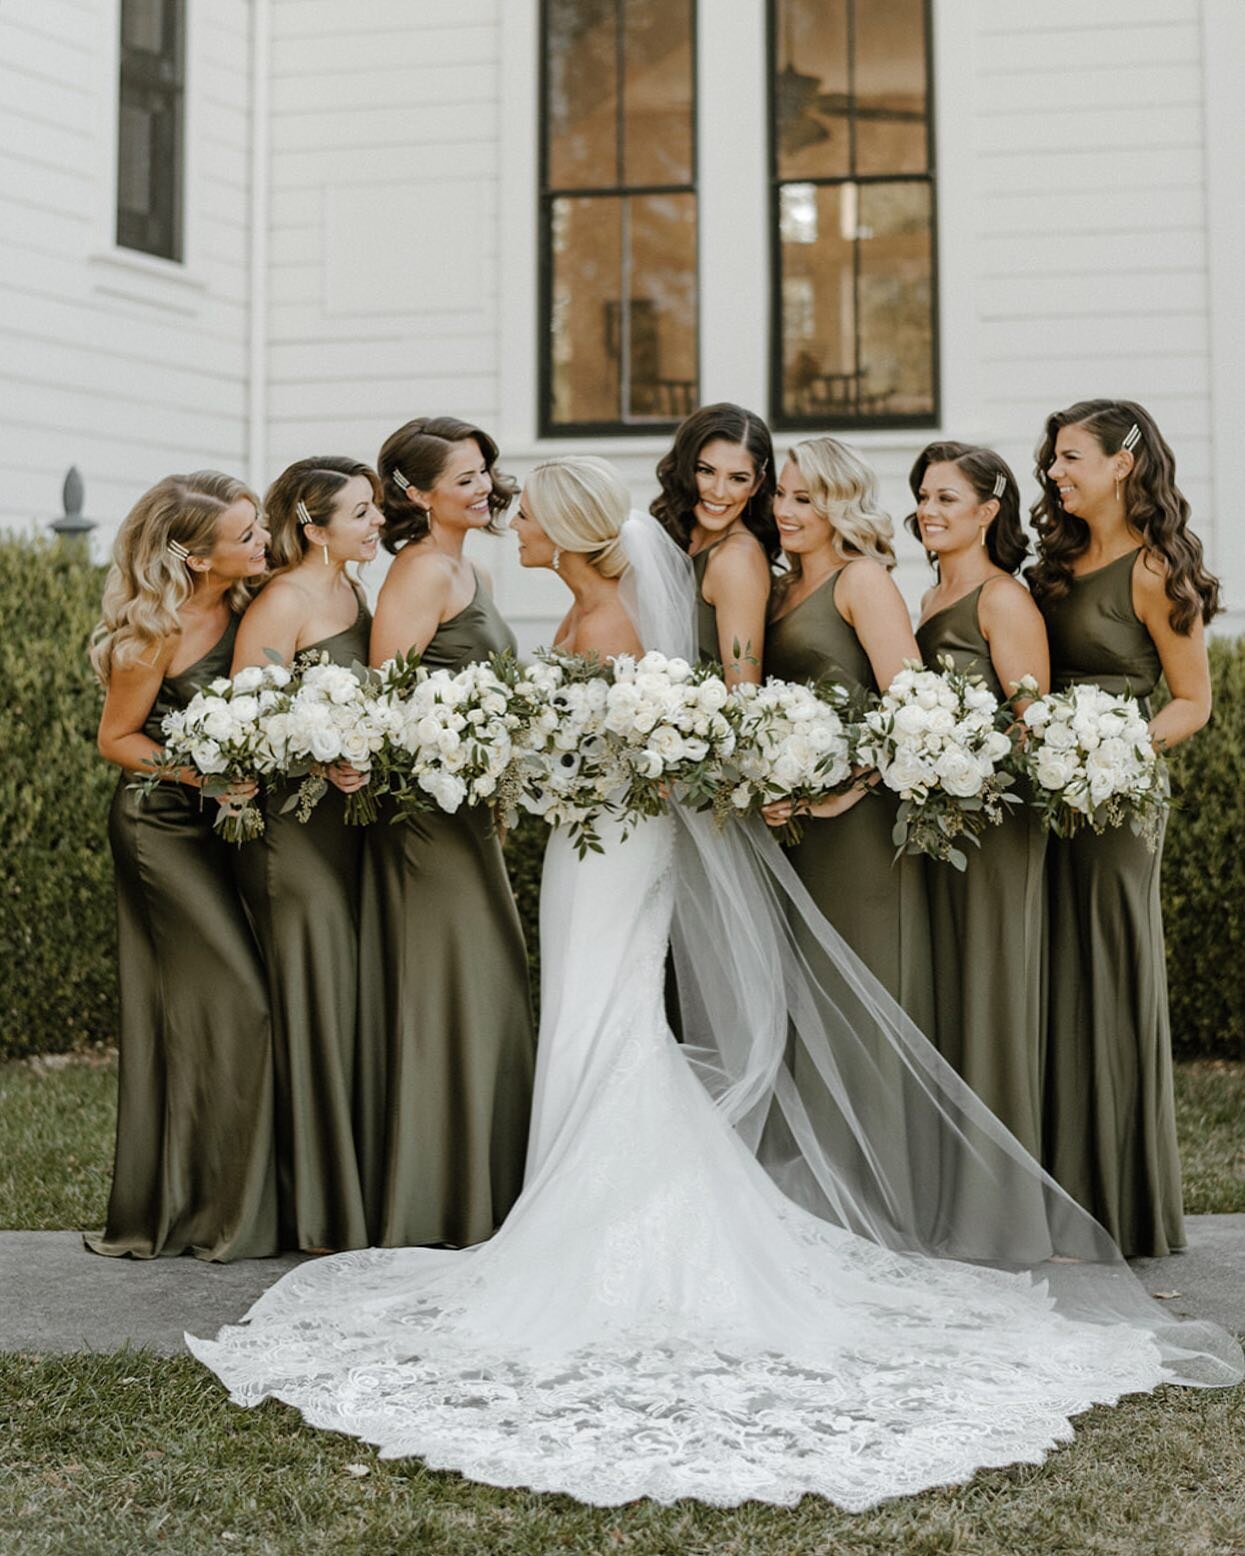 These bridesmaid dresses were the perfect hue of earthy green